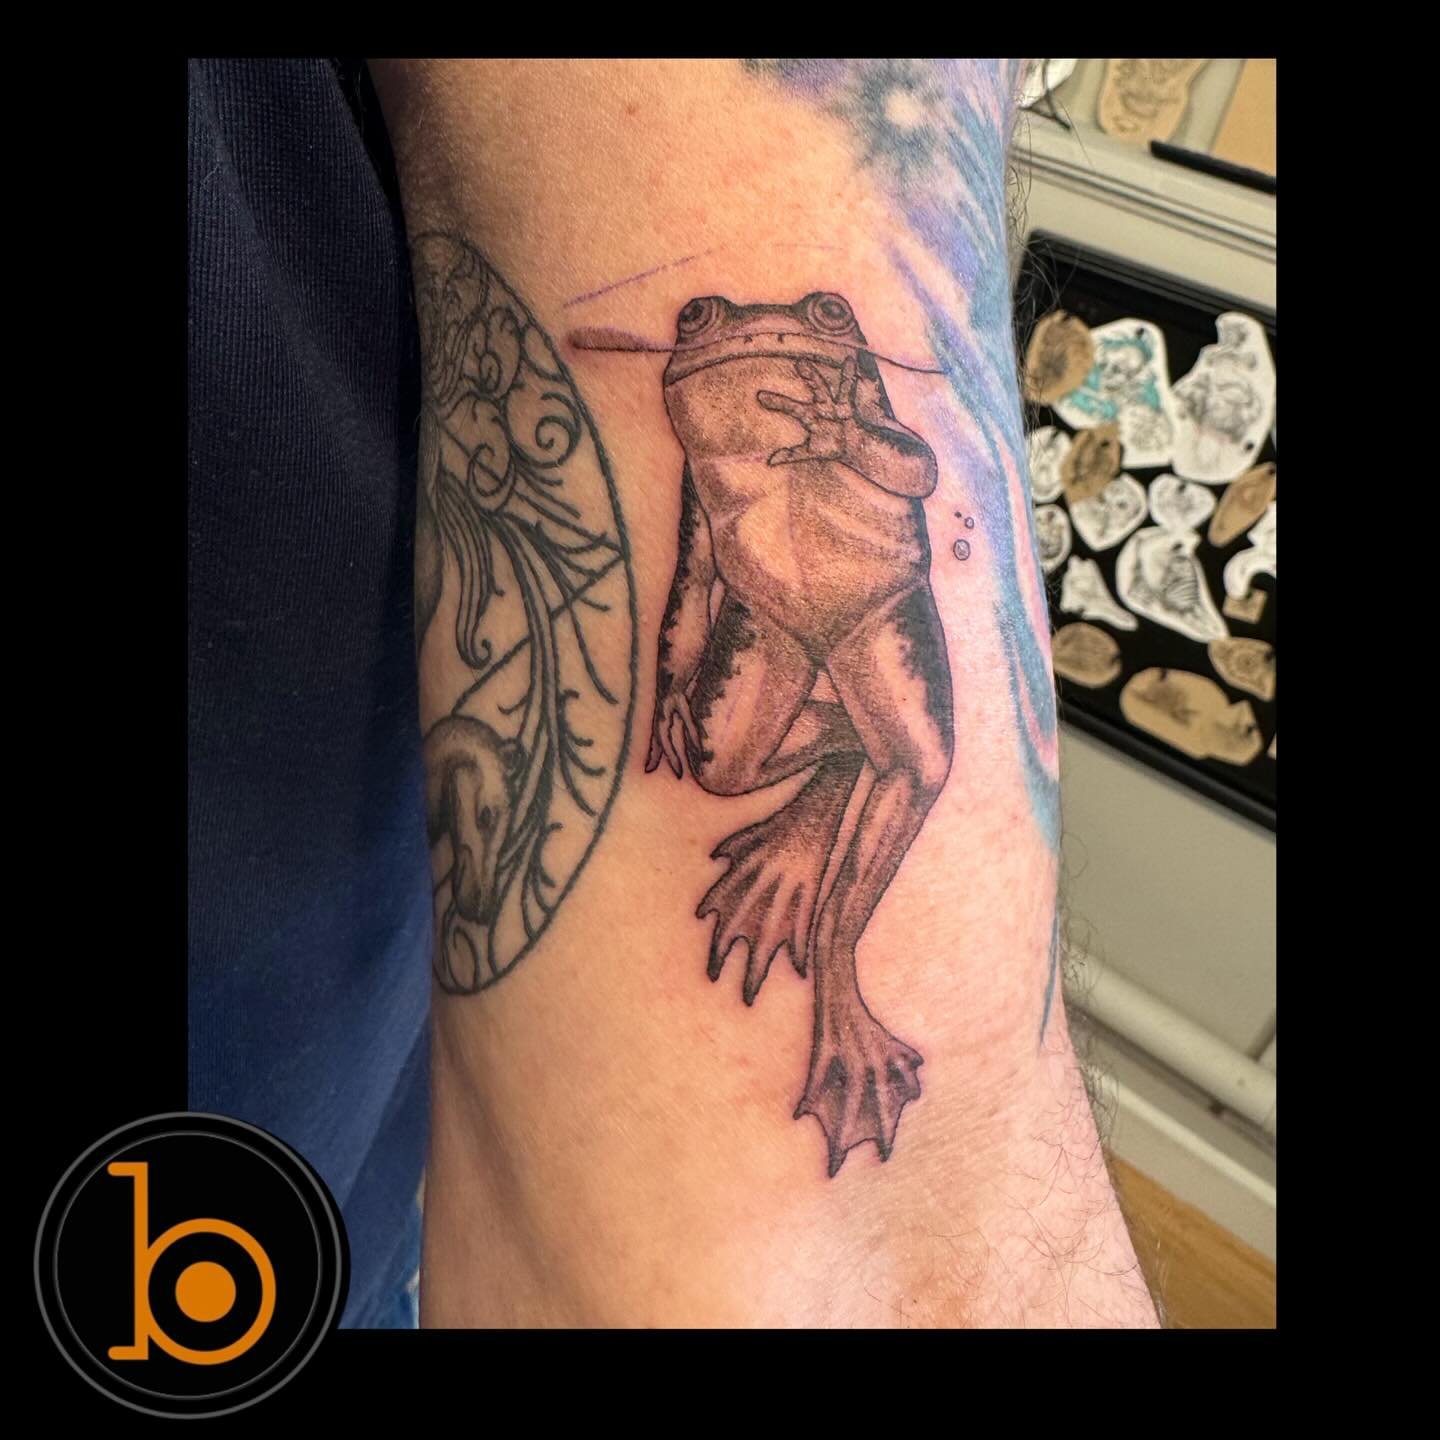 Some Hippity hoppers by resident artist @vct.tattoos 
➖➖➖➖➖➖➖➖➖➖➖➖➖➖➖➖➖
Blueprint Gallery
138 Russell St
 Hadley MA 01035
📱(413)-387-0221 
WALK-INS WELCOME 
🕸️ www.blueprintgallery.com 🕸️
⬇️⬇️⬇️⬇️⬇️⬇️⬇️⬇️⬇️⬇️⬇️⬇️⬇️
Made using materials from:
🌈 @w